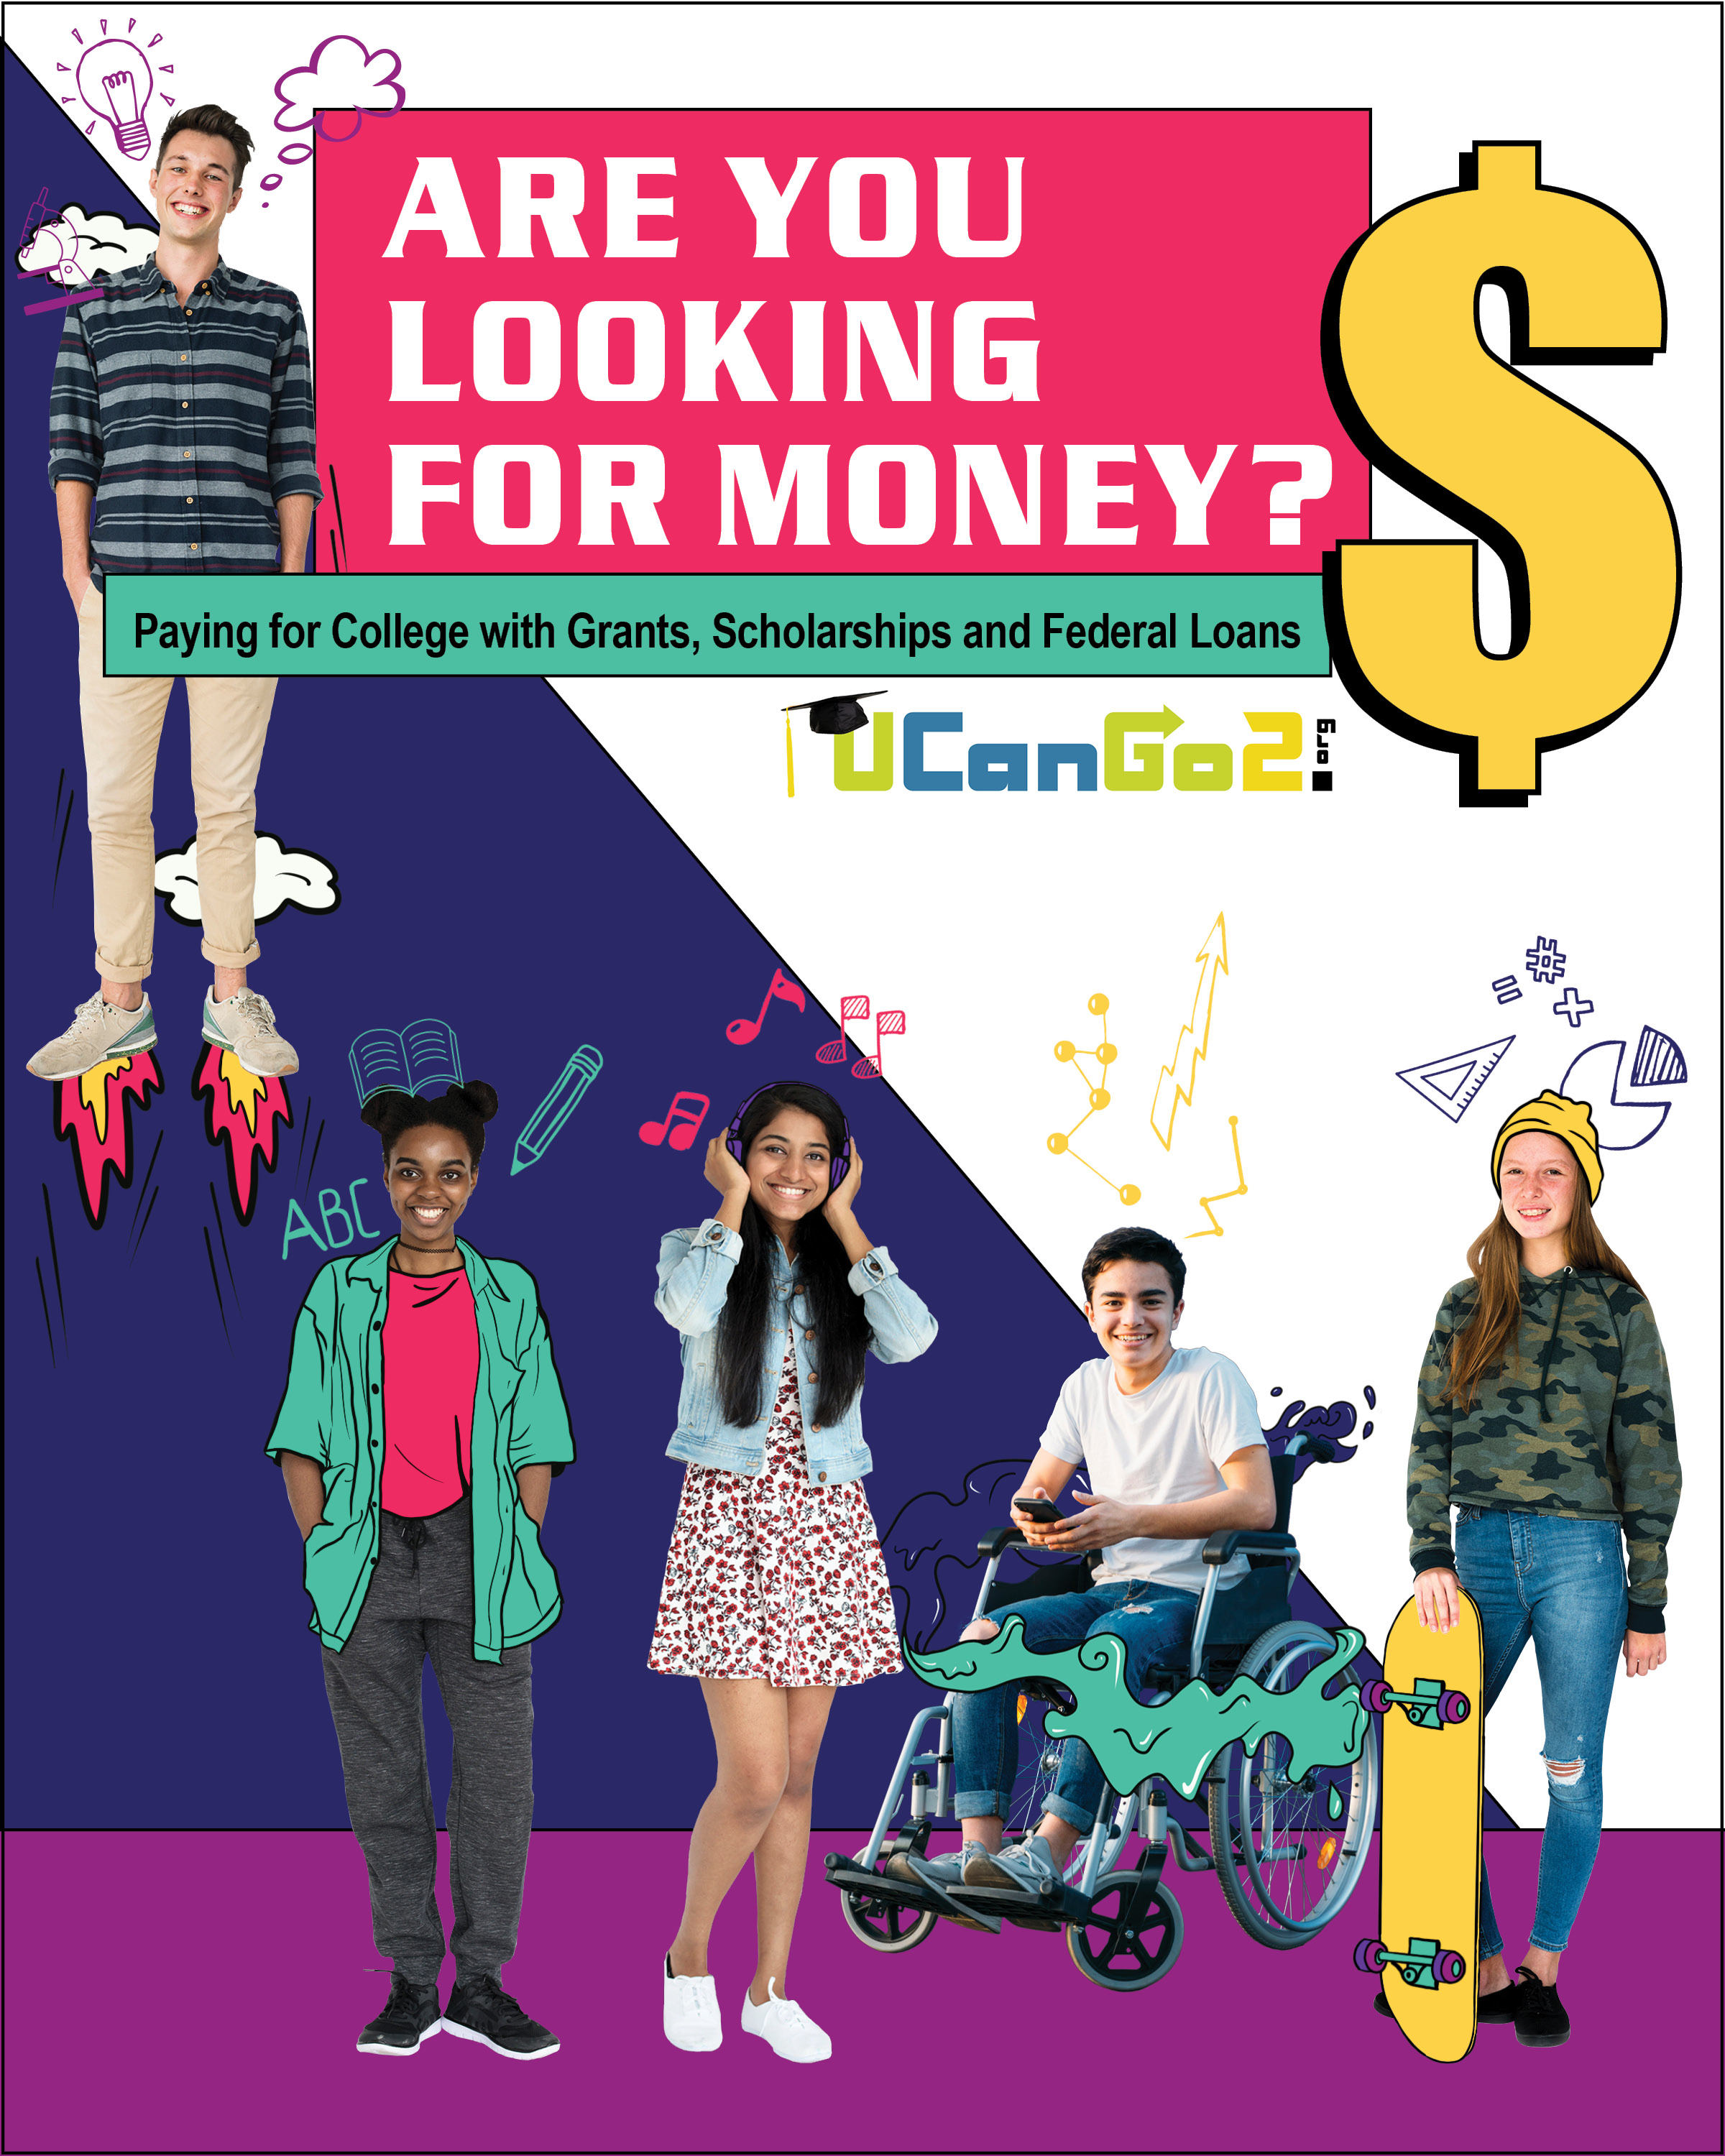 PDF of Are You Looking for Money opens in a new tab